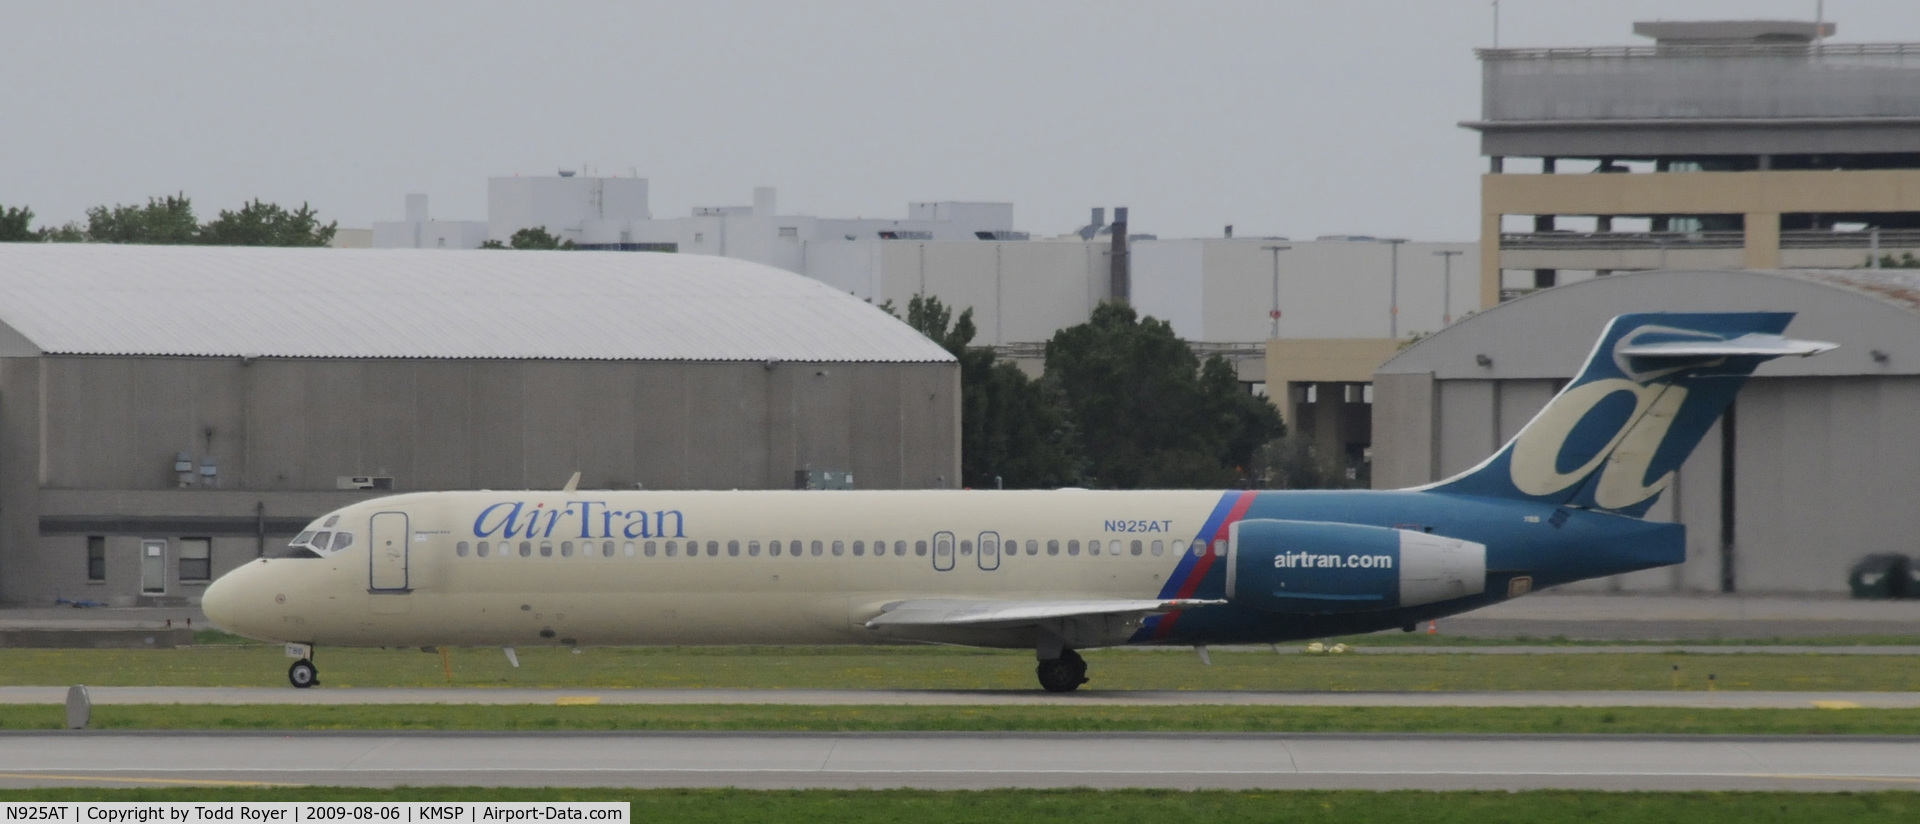 N925AT, 2000 Boeing 717-200 C/N 55079, Taxi for departure